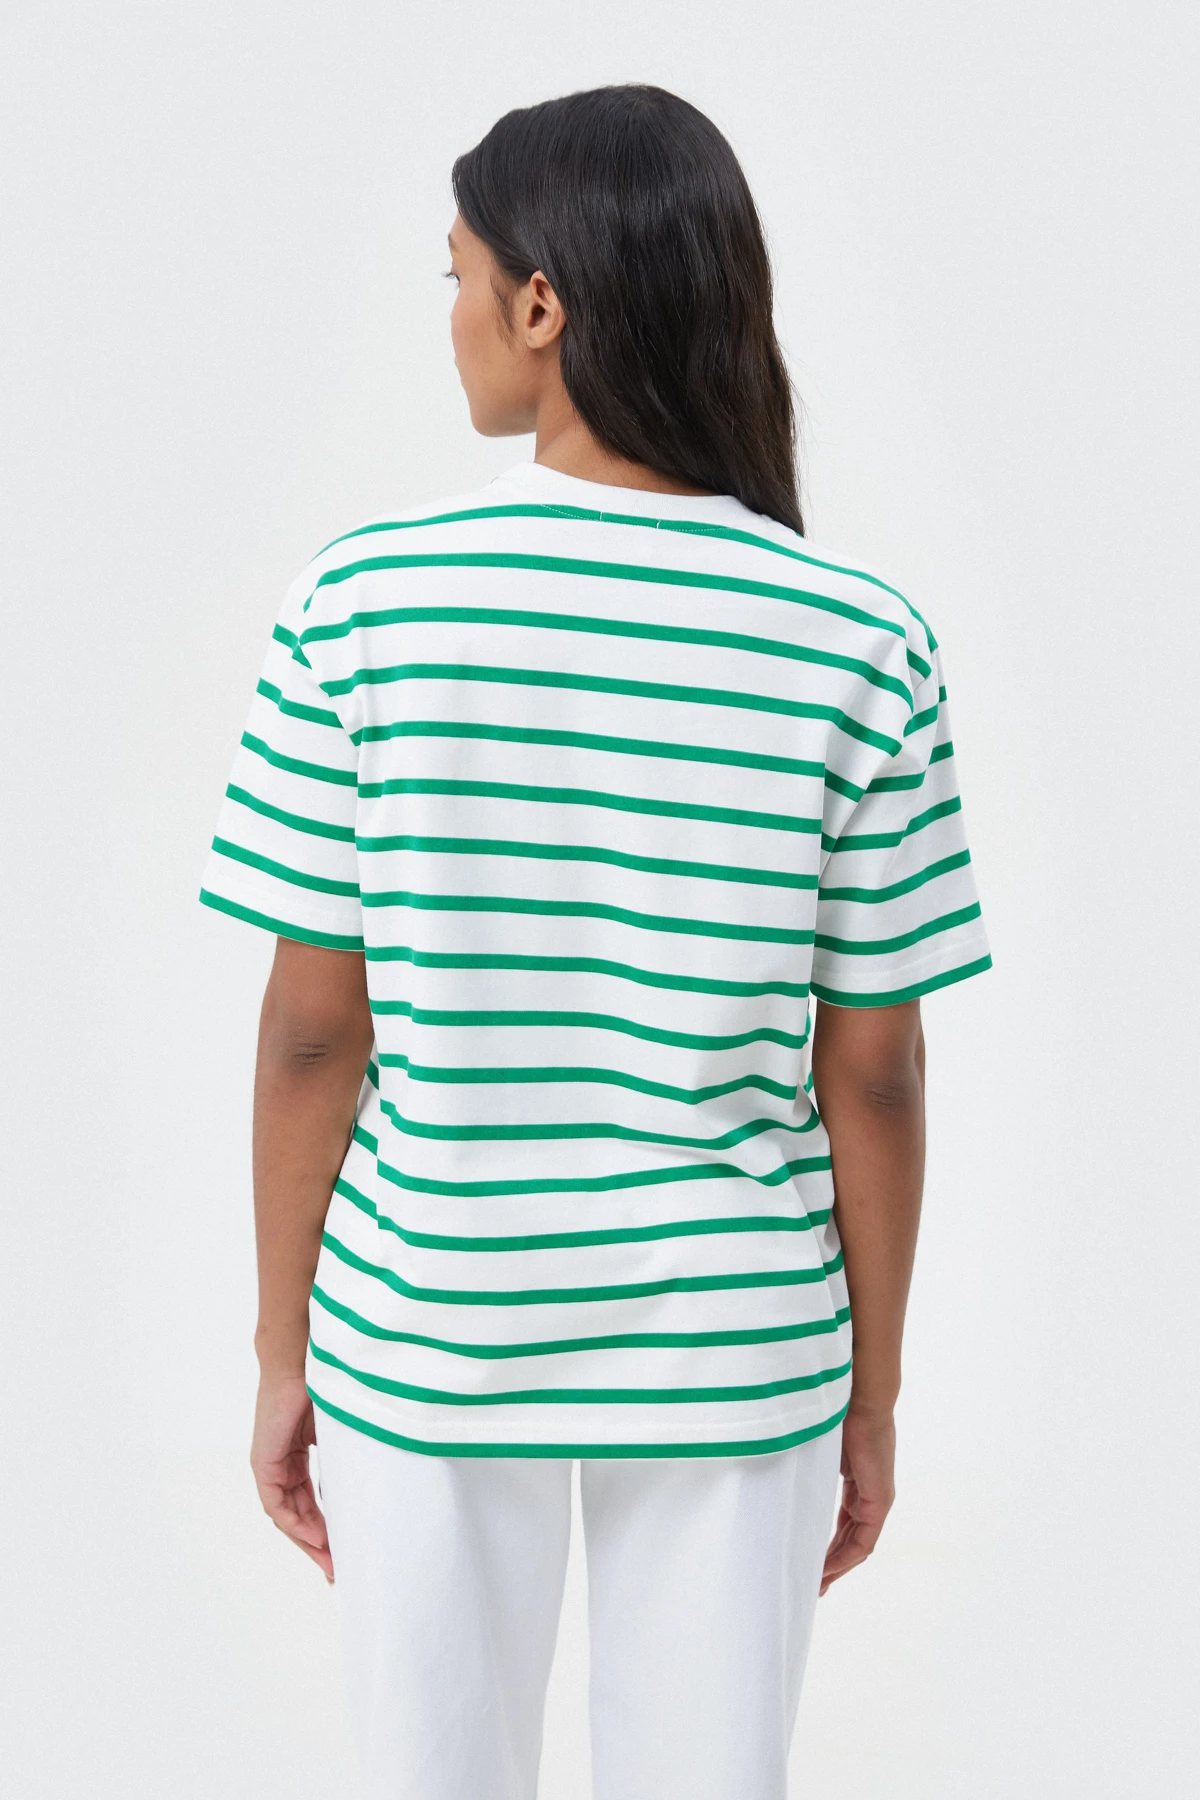 Cotton T-shirt with green stripes, photo 3